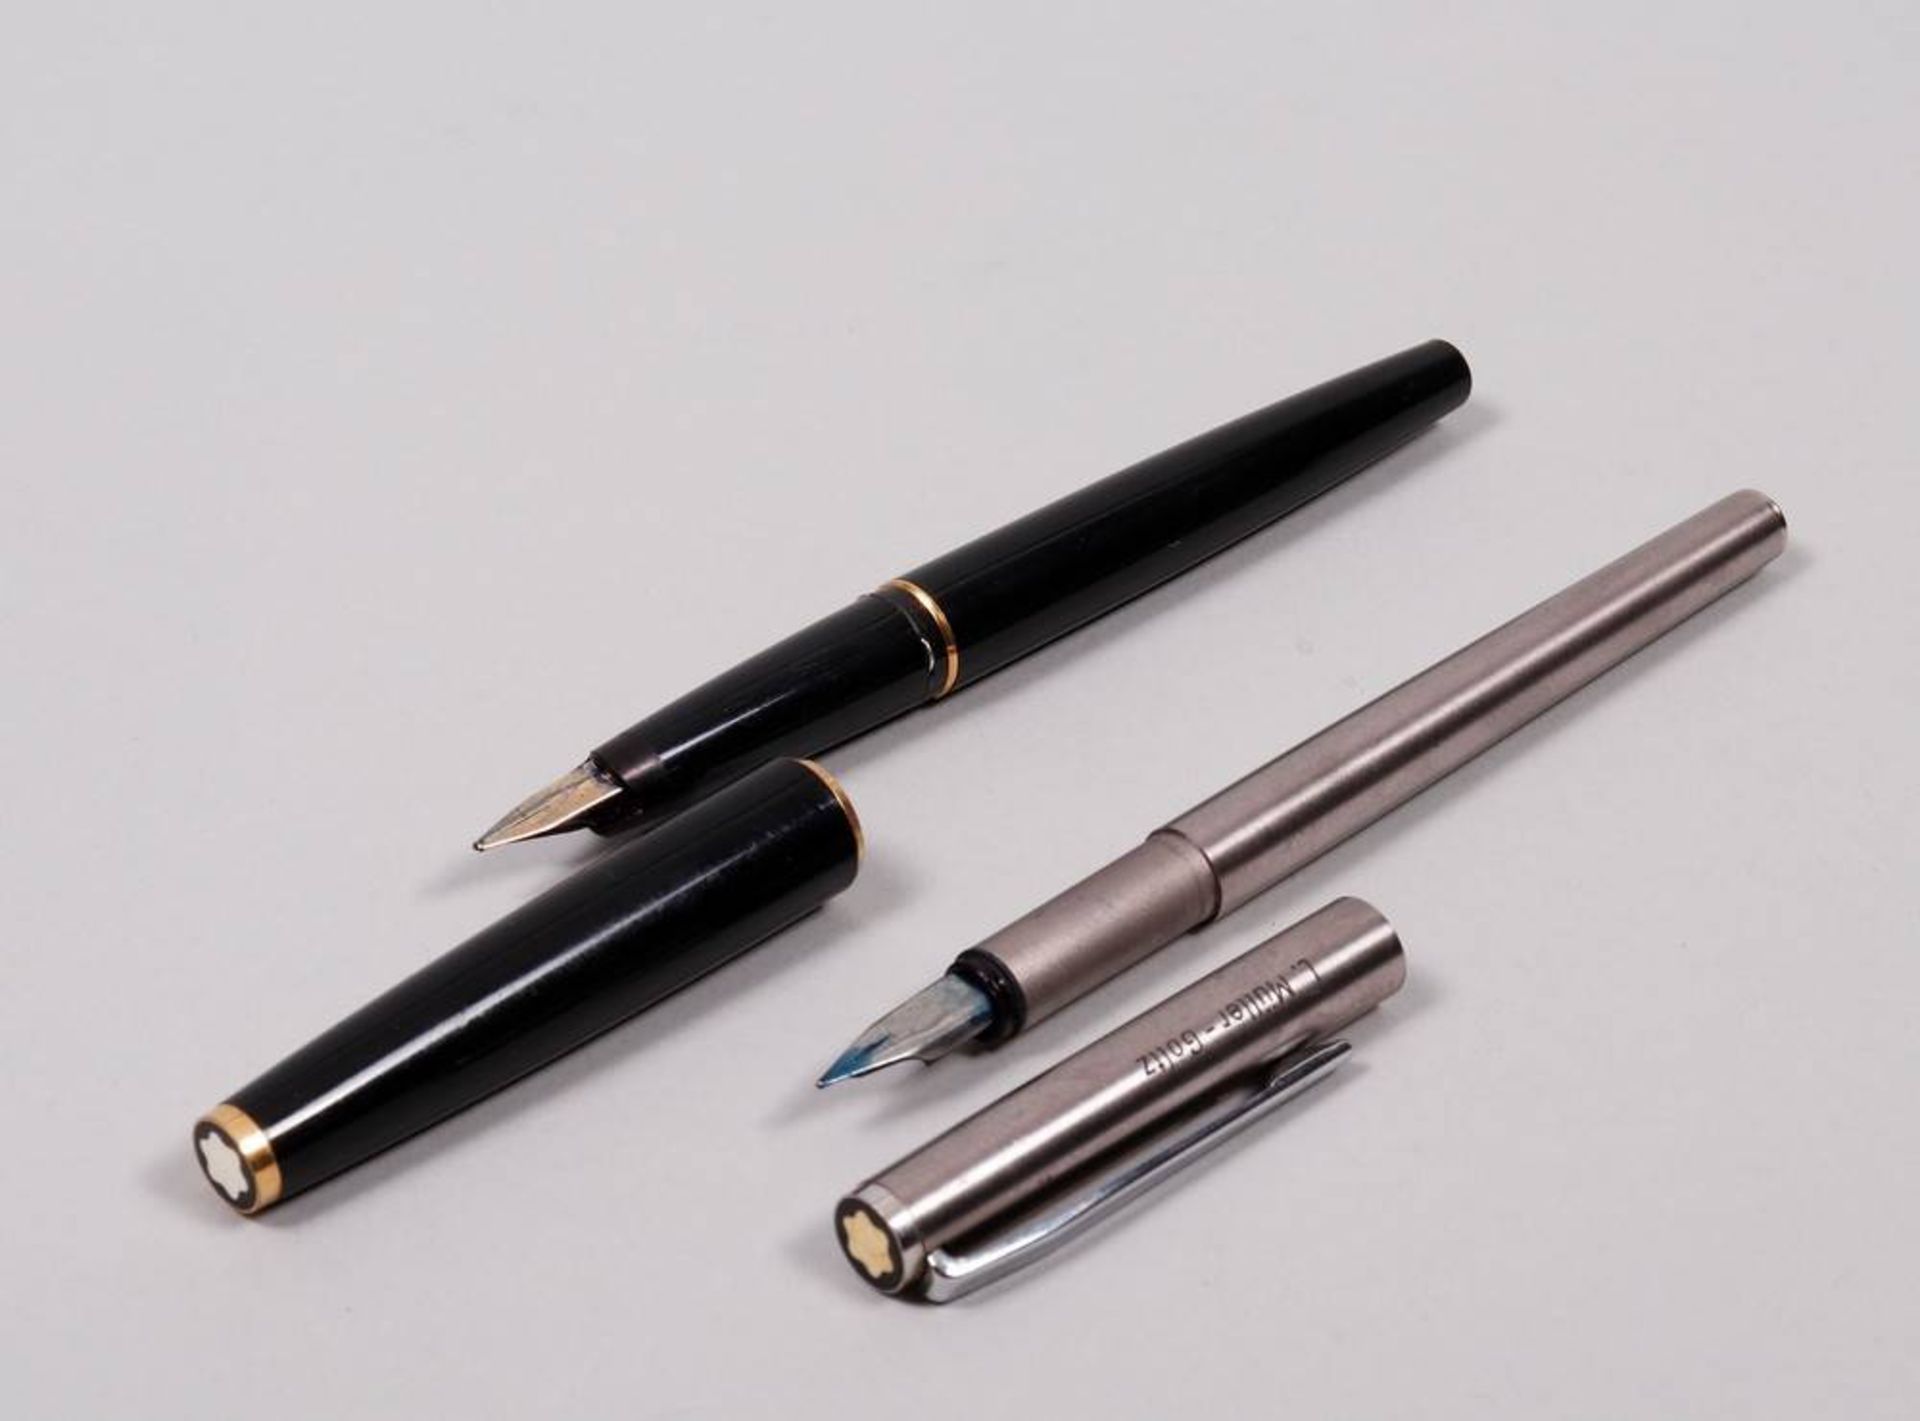 2 Fountain pens Montblanc, 1x steel, 1x black plastic, L: 13,5-14cm, signs of use, 1 with engraved - Bild 2 aus 2